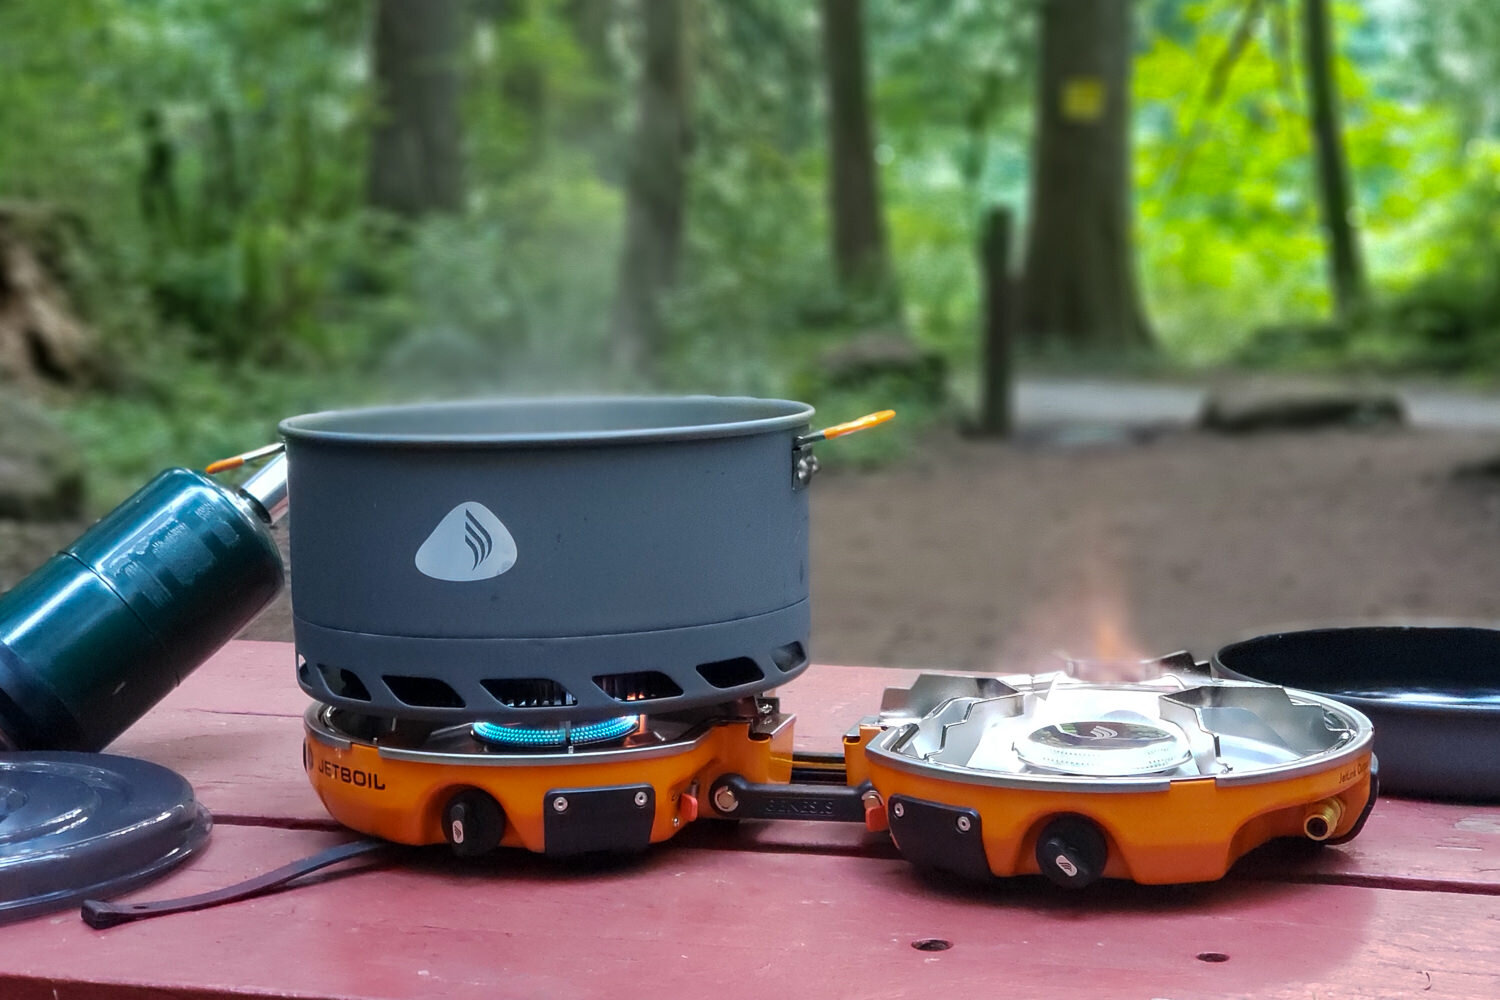 The Jetboil Genesis Basecamp System is an amazingly compact, fast, and efficient all-in-one cooking system